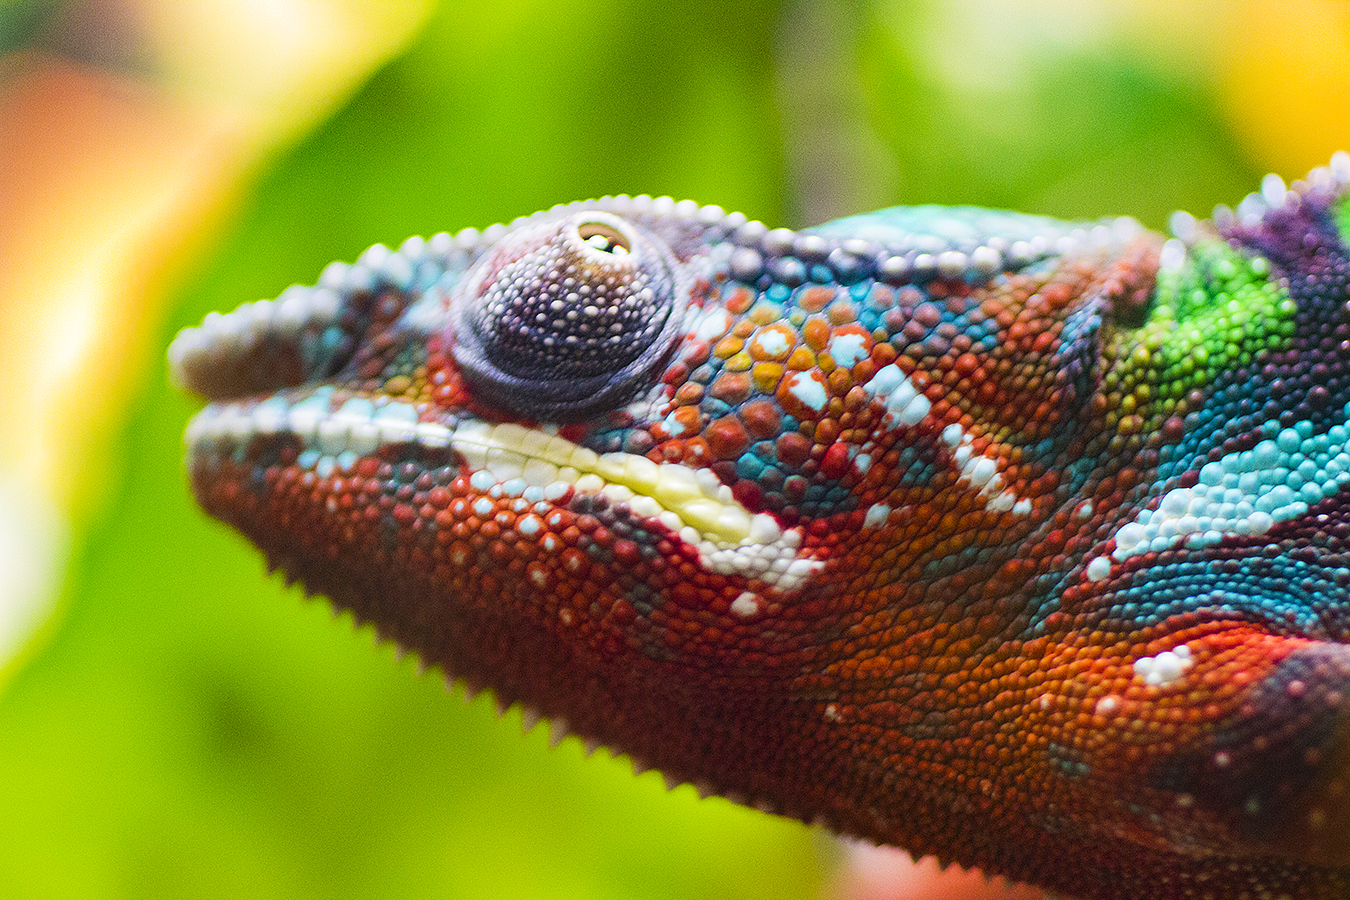 Remy_Haber_Philadelphia_Zoo_Chameleon_rainbow_multicolor_candy_scales_camouflage